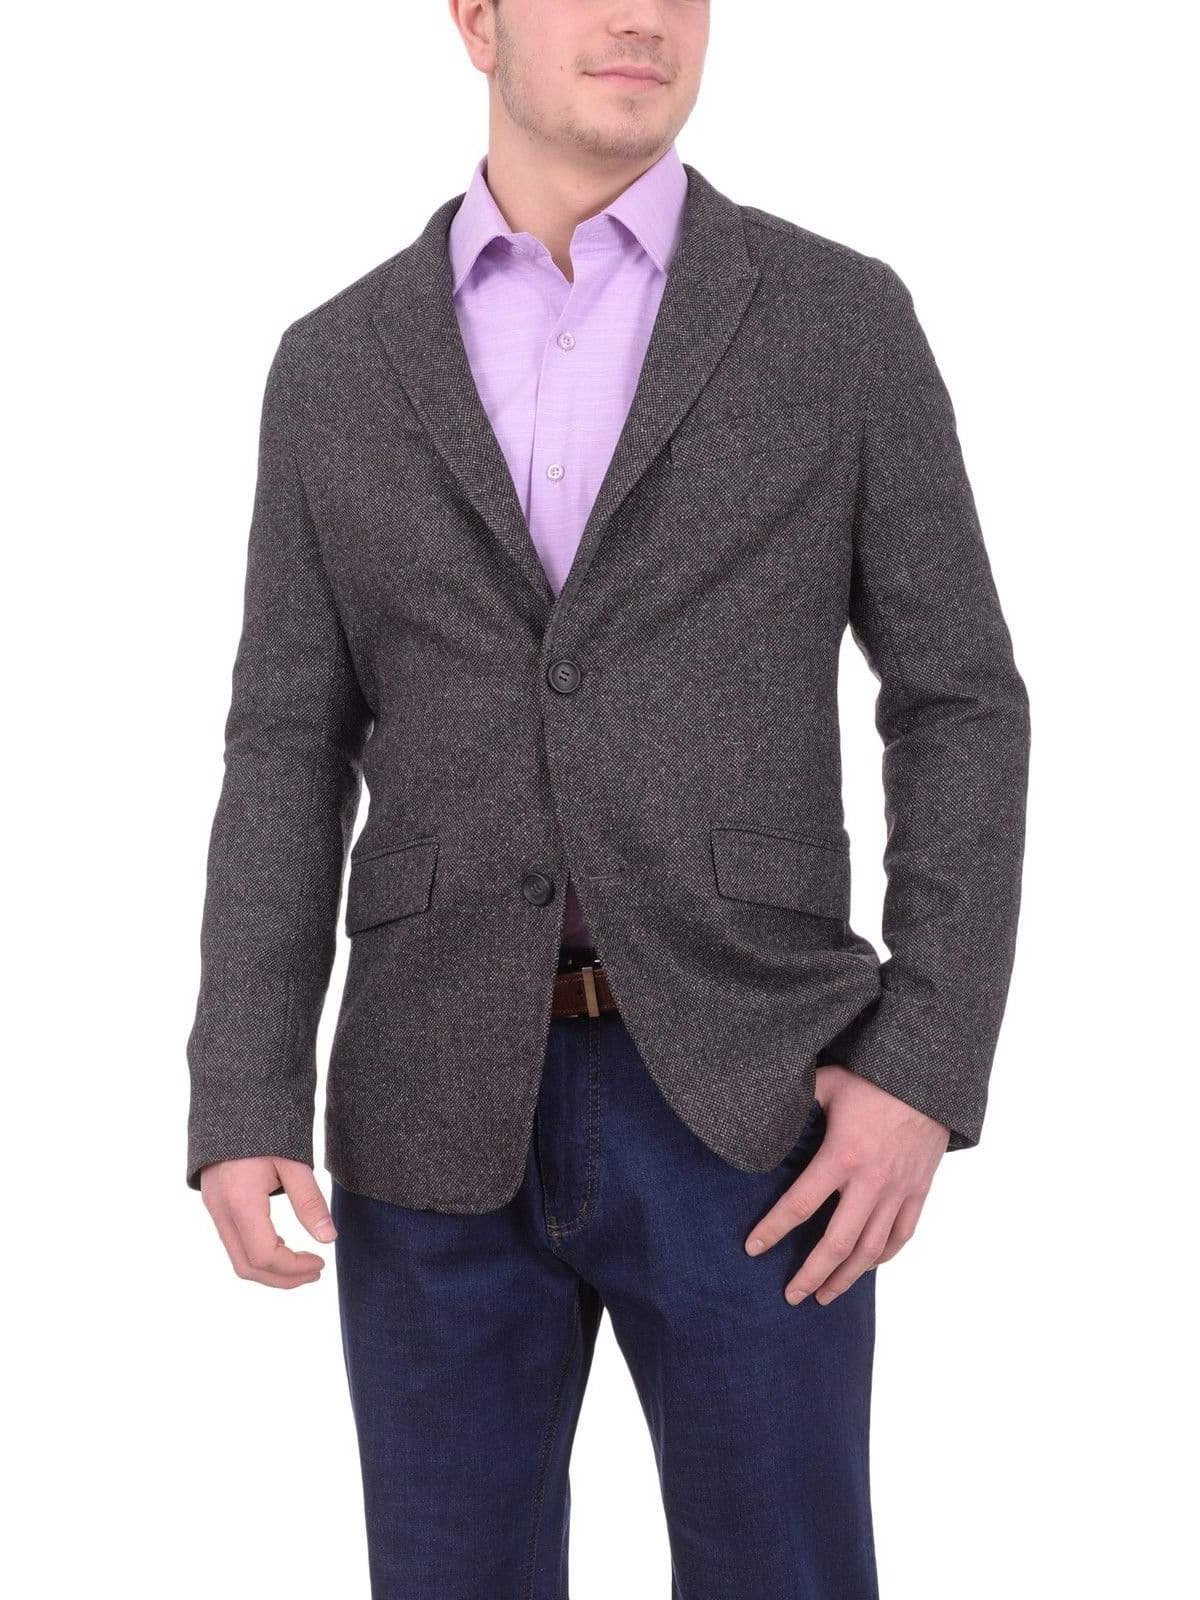 NapGray Textured Half Canvassed Wool Blazer Sportcoat With Peak Lapels